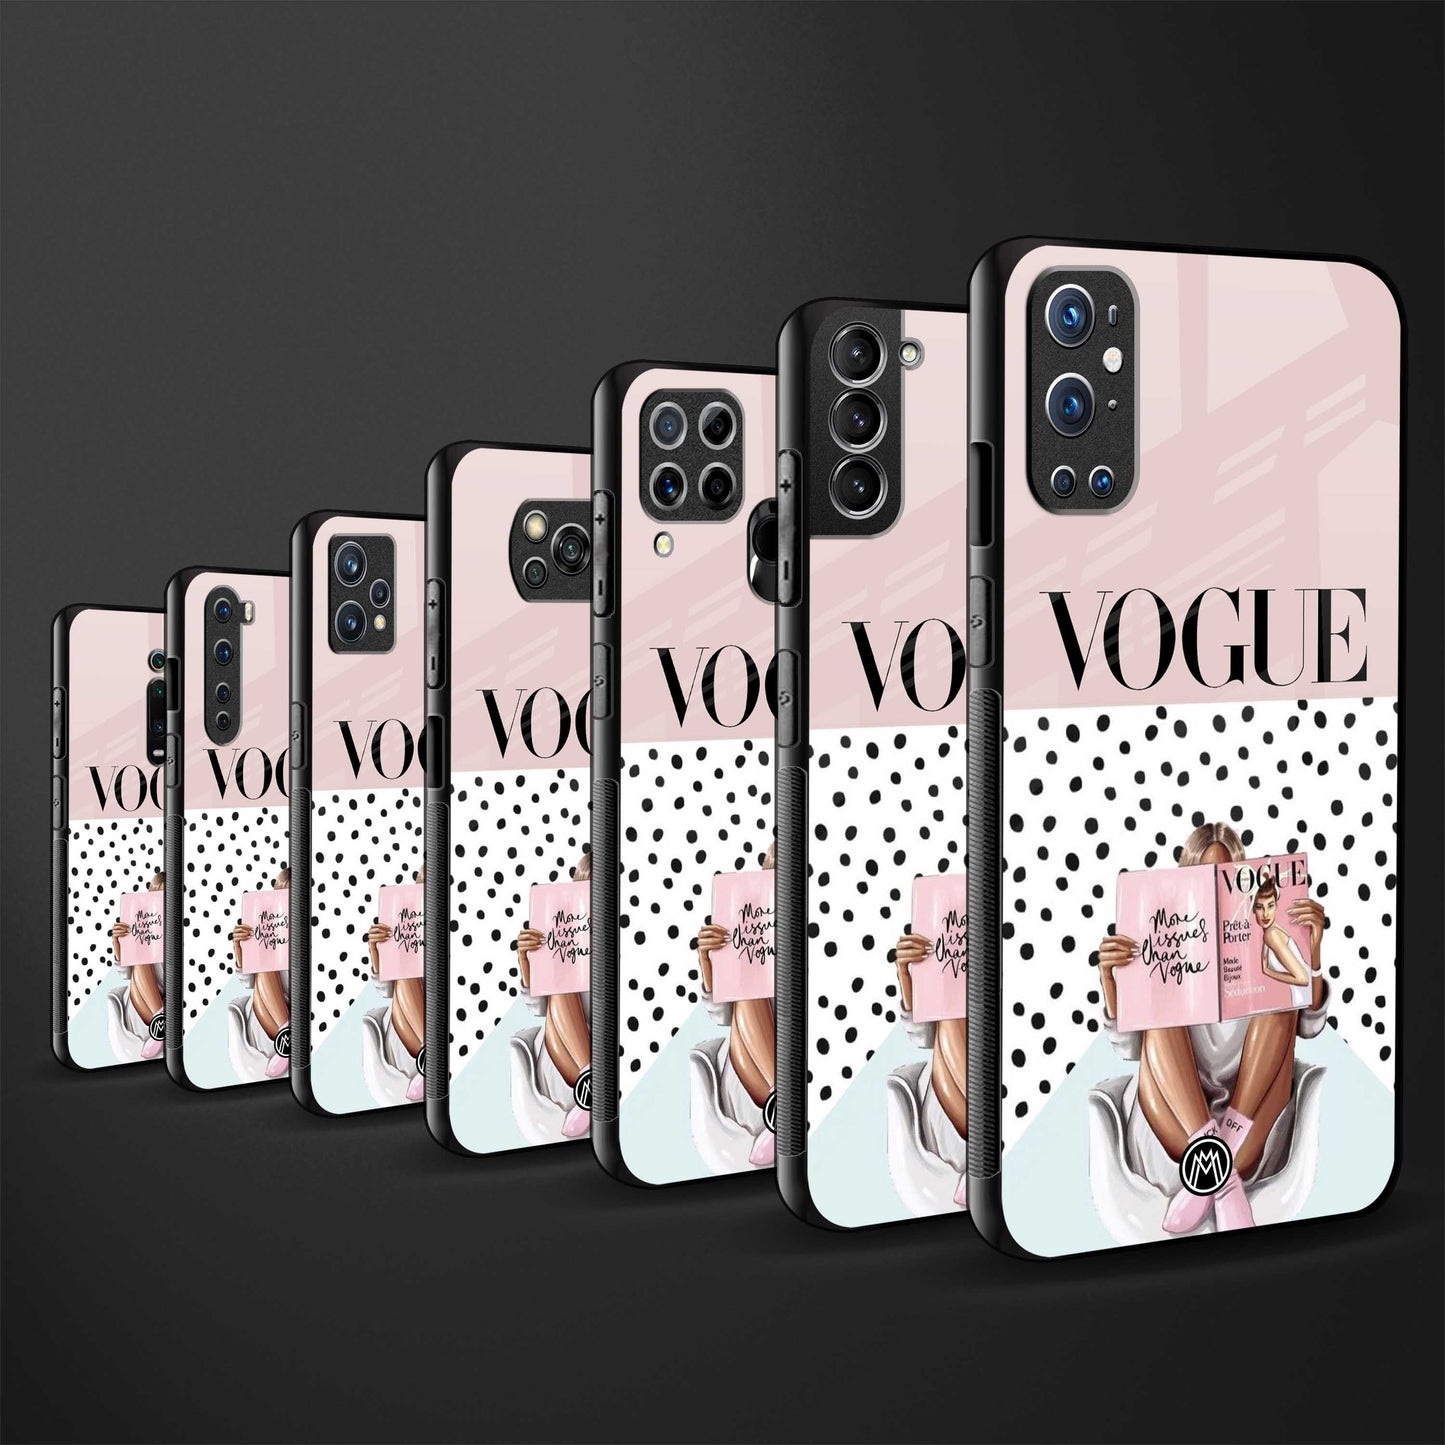 vogue queen back phone cover | glass case for vivo y73